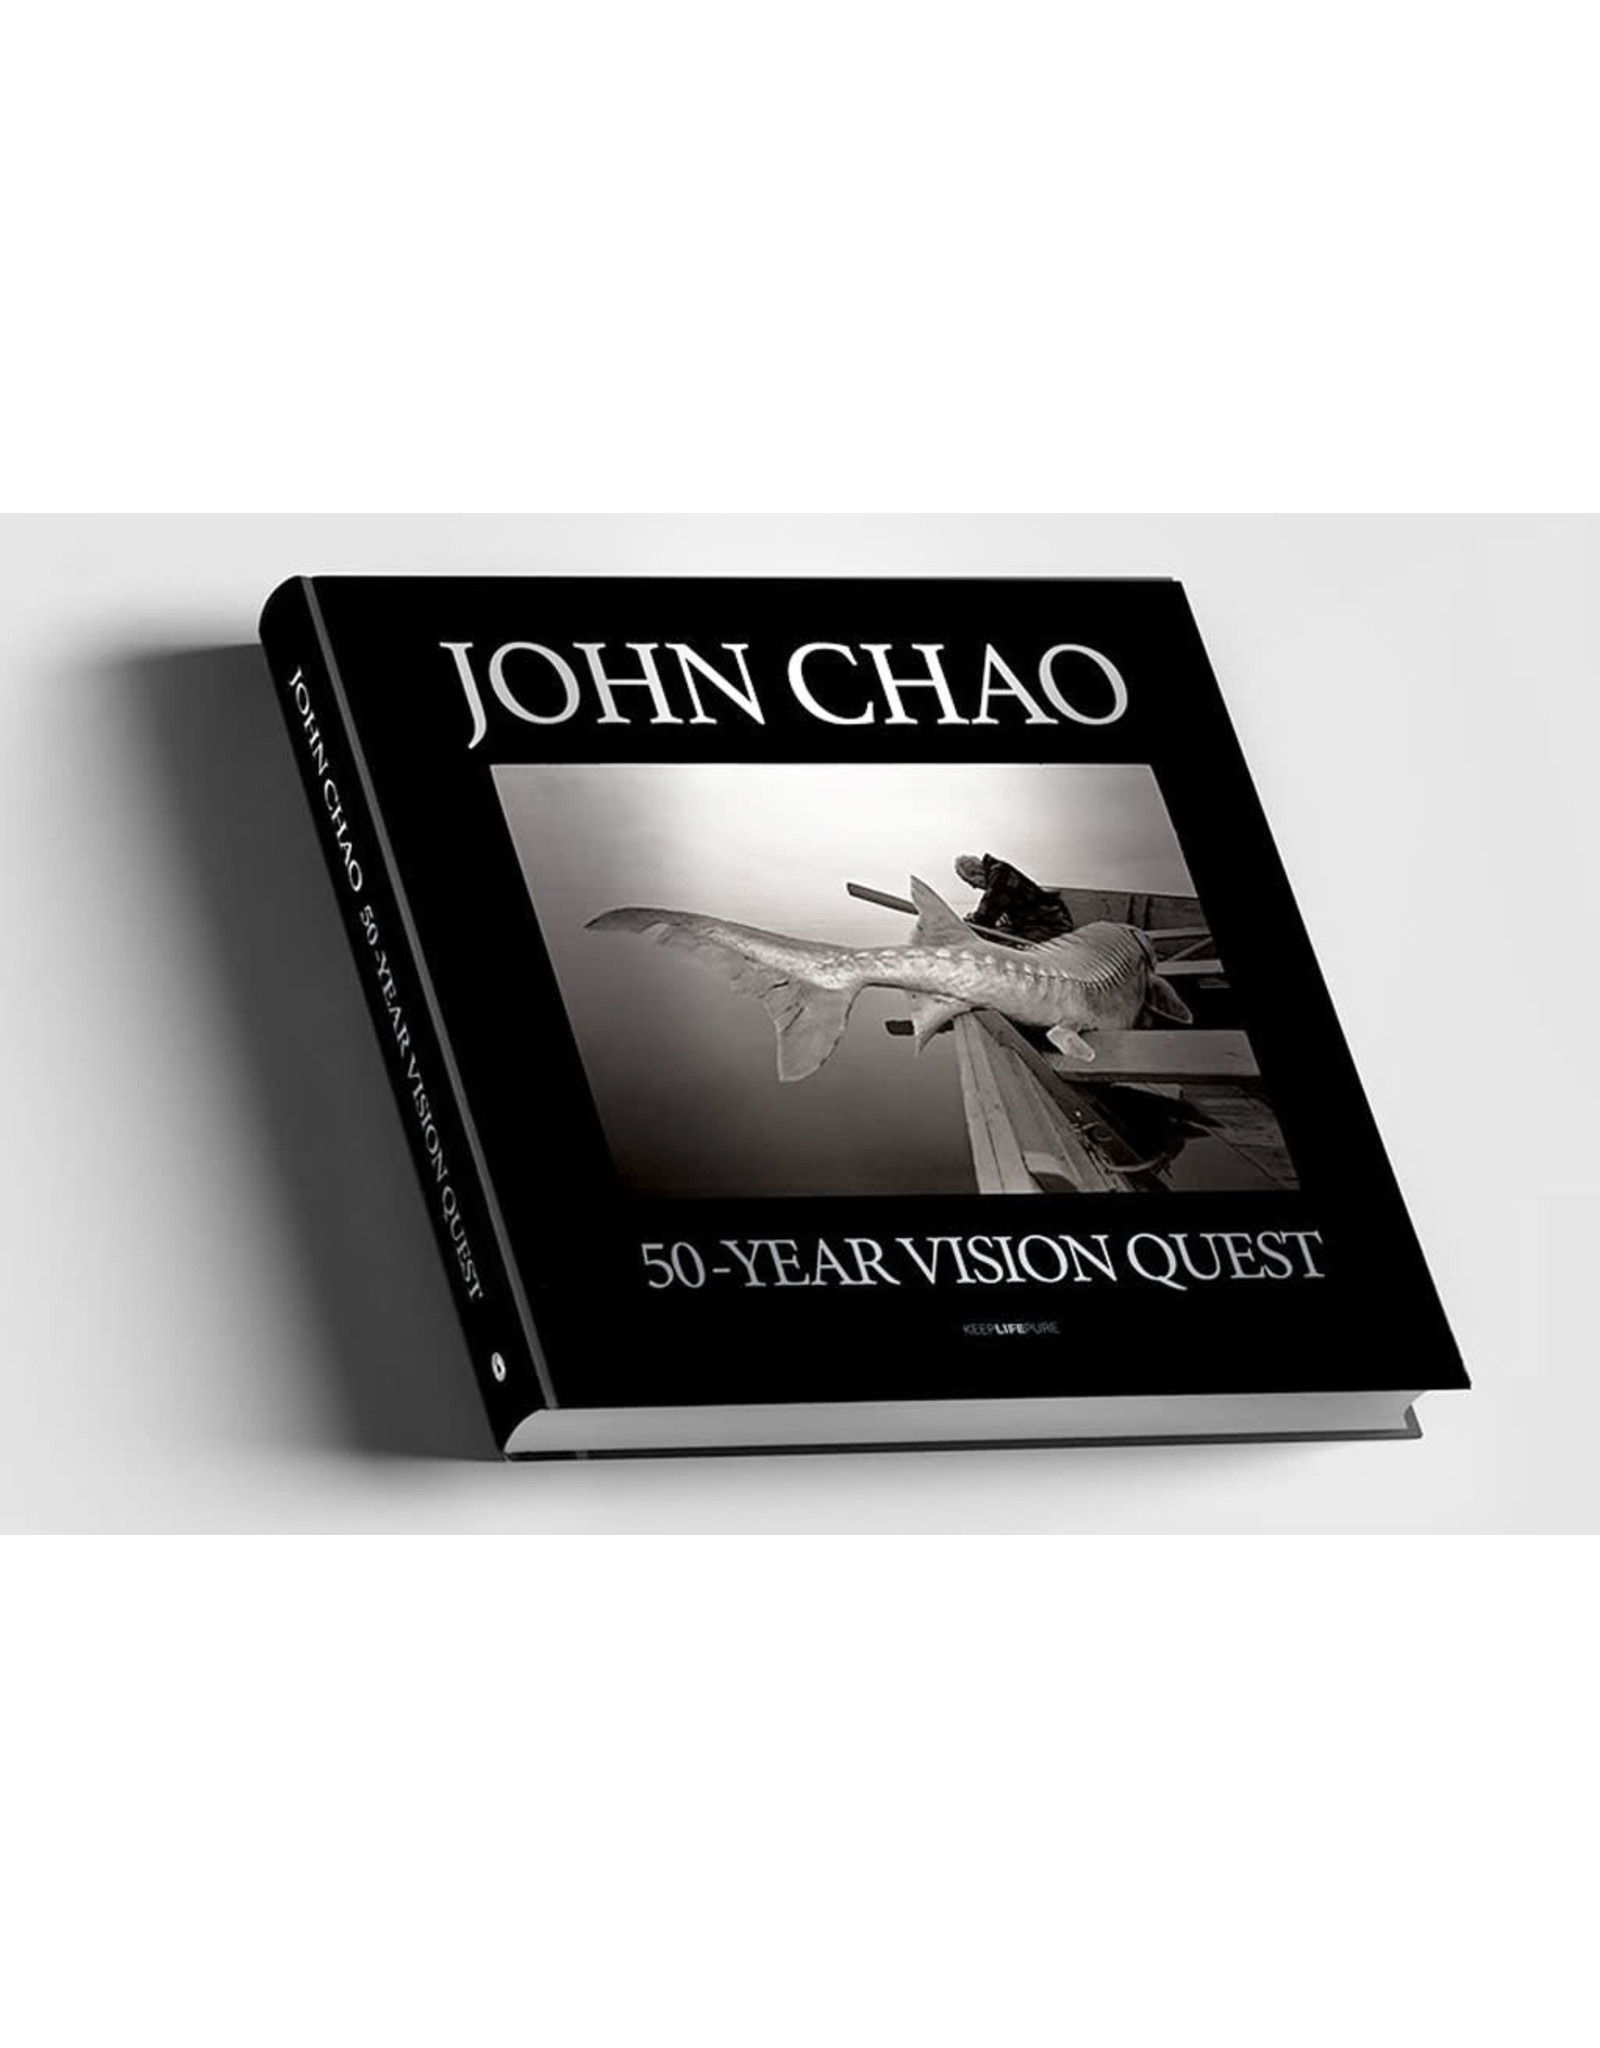 John Chao: 50-Year Vision Quest (Signed)